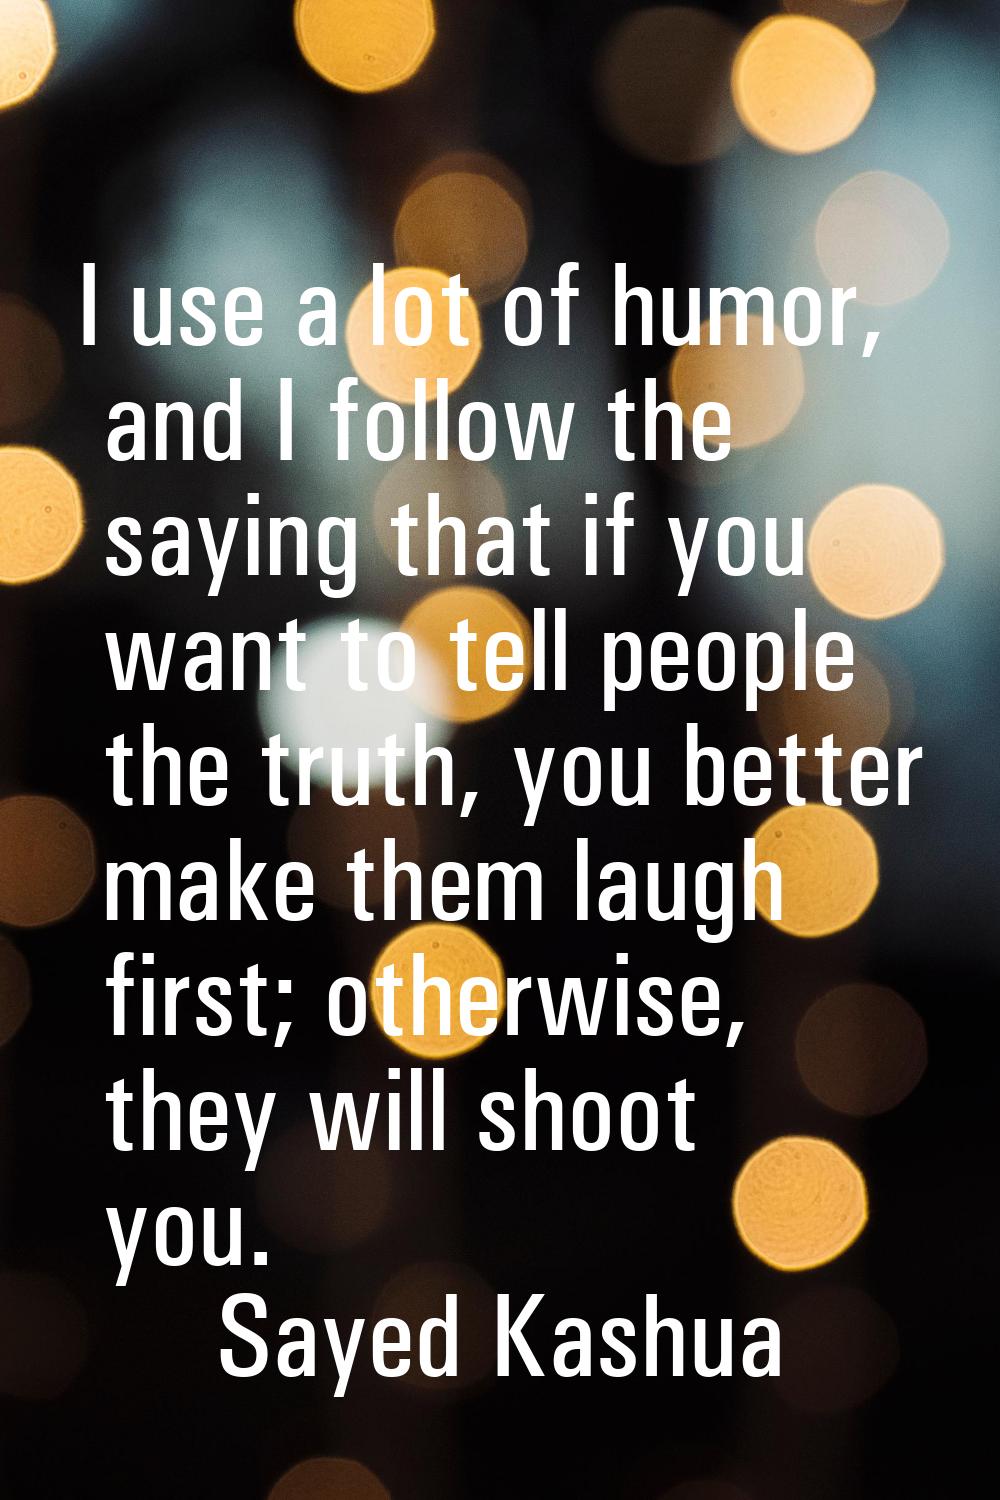 I use a lot of humor, and I follow the saying that if you want to tell people the truth, you better